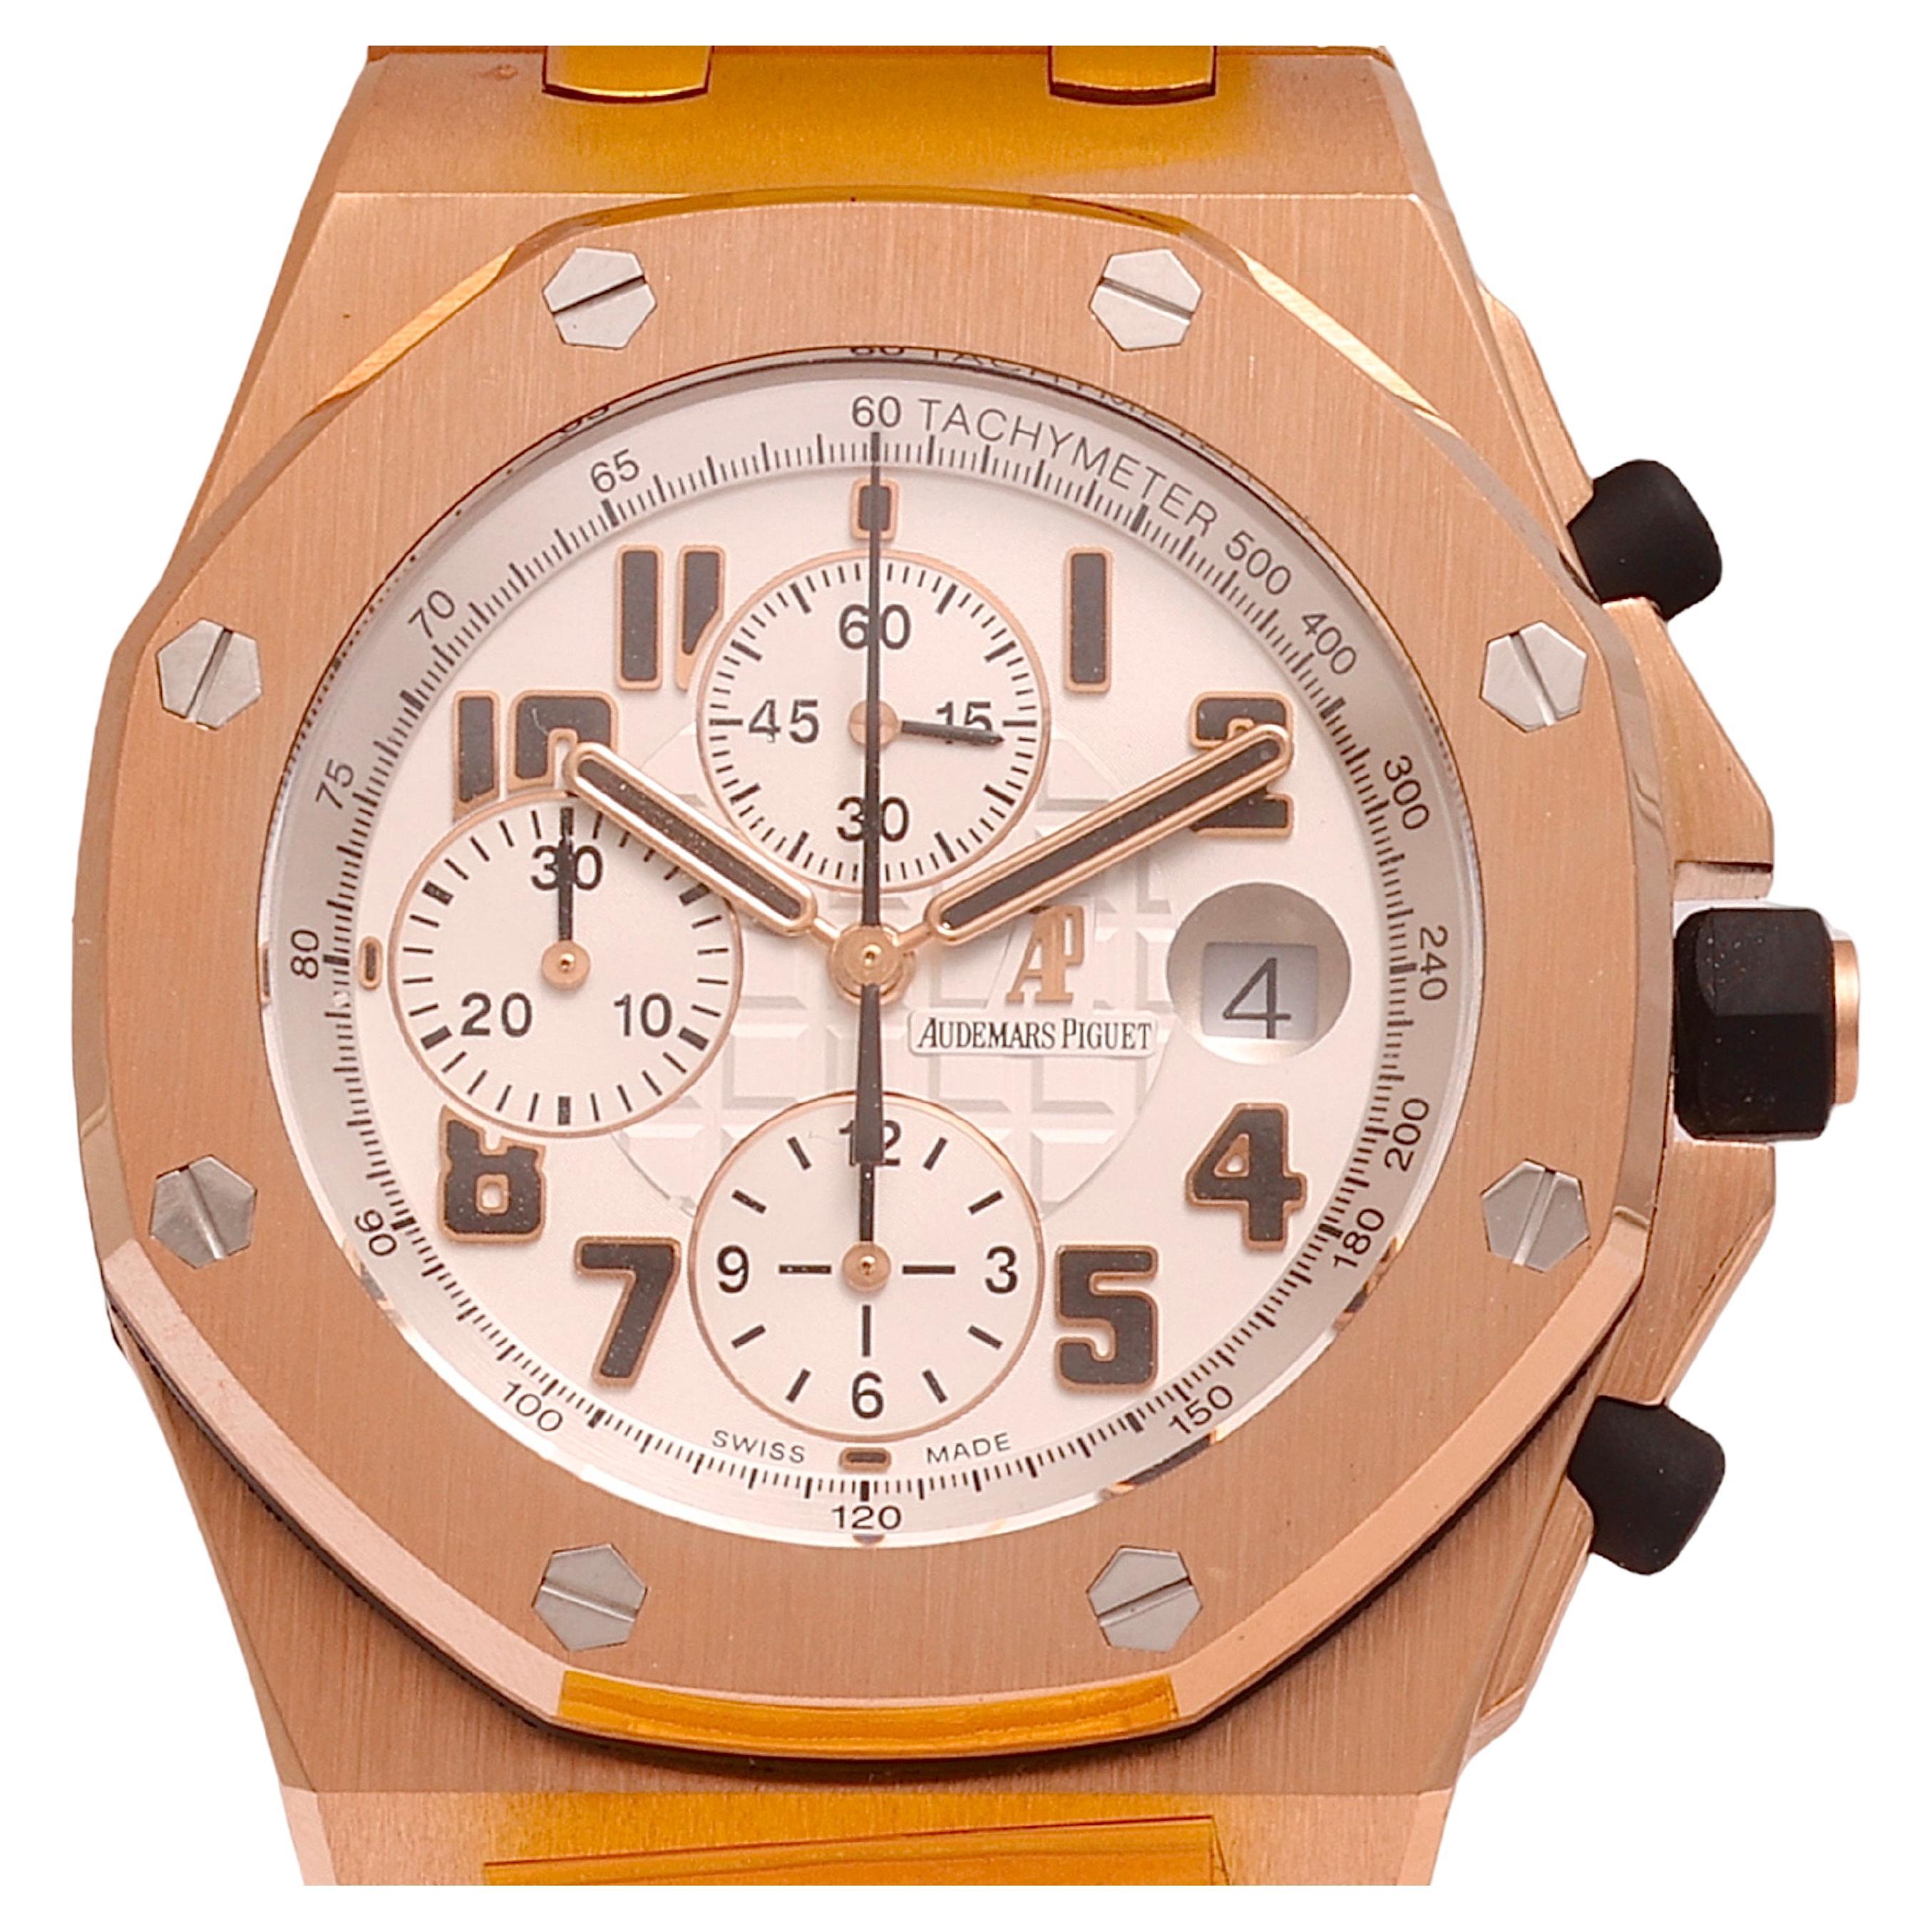 18 Kt Pink/Rose Gold Audemars Piguet Off Shore Chronograph, Extract/Box/Revision For Sale